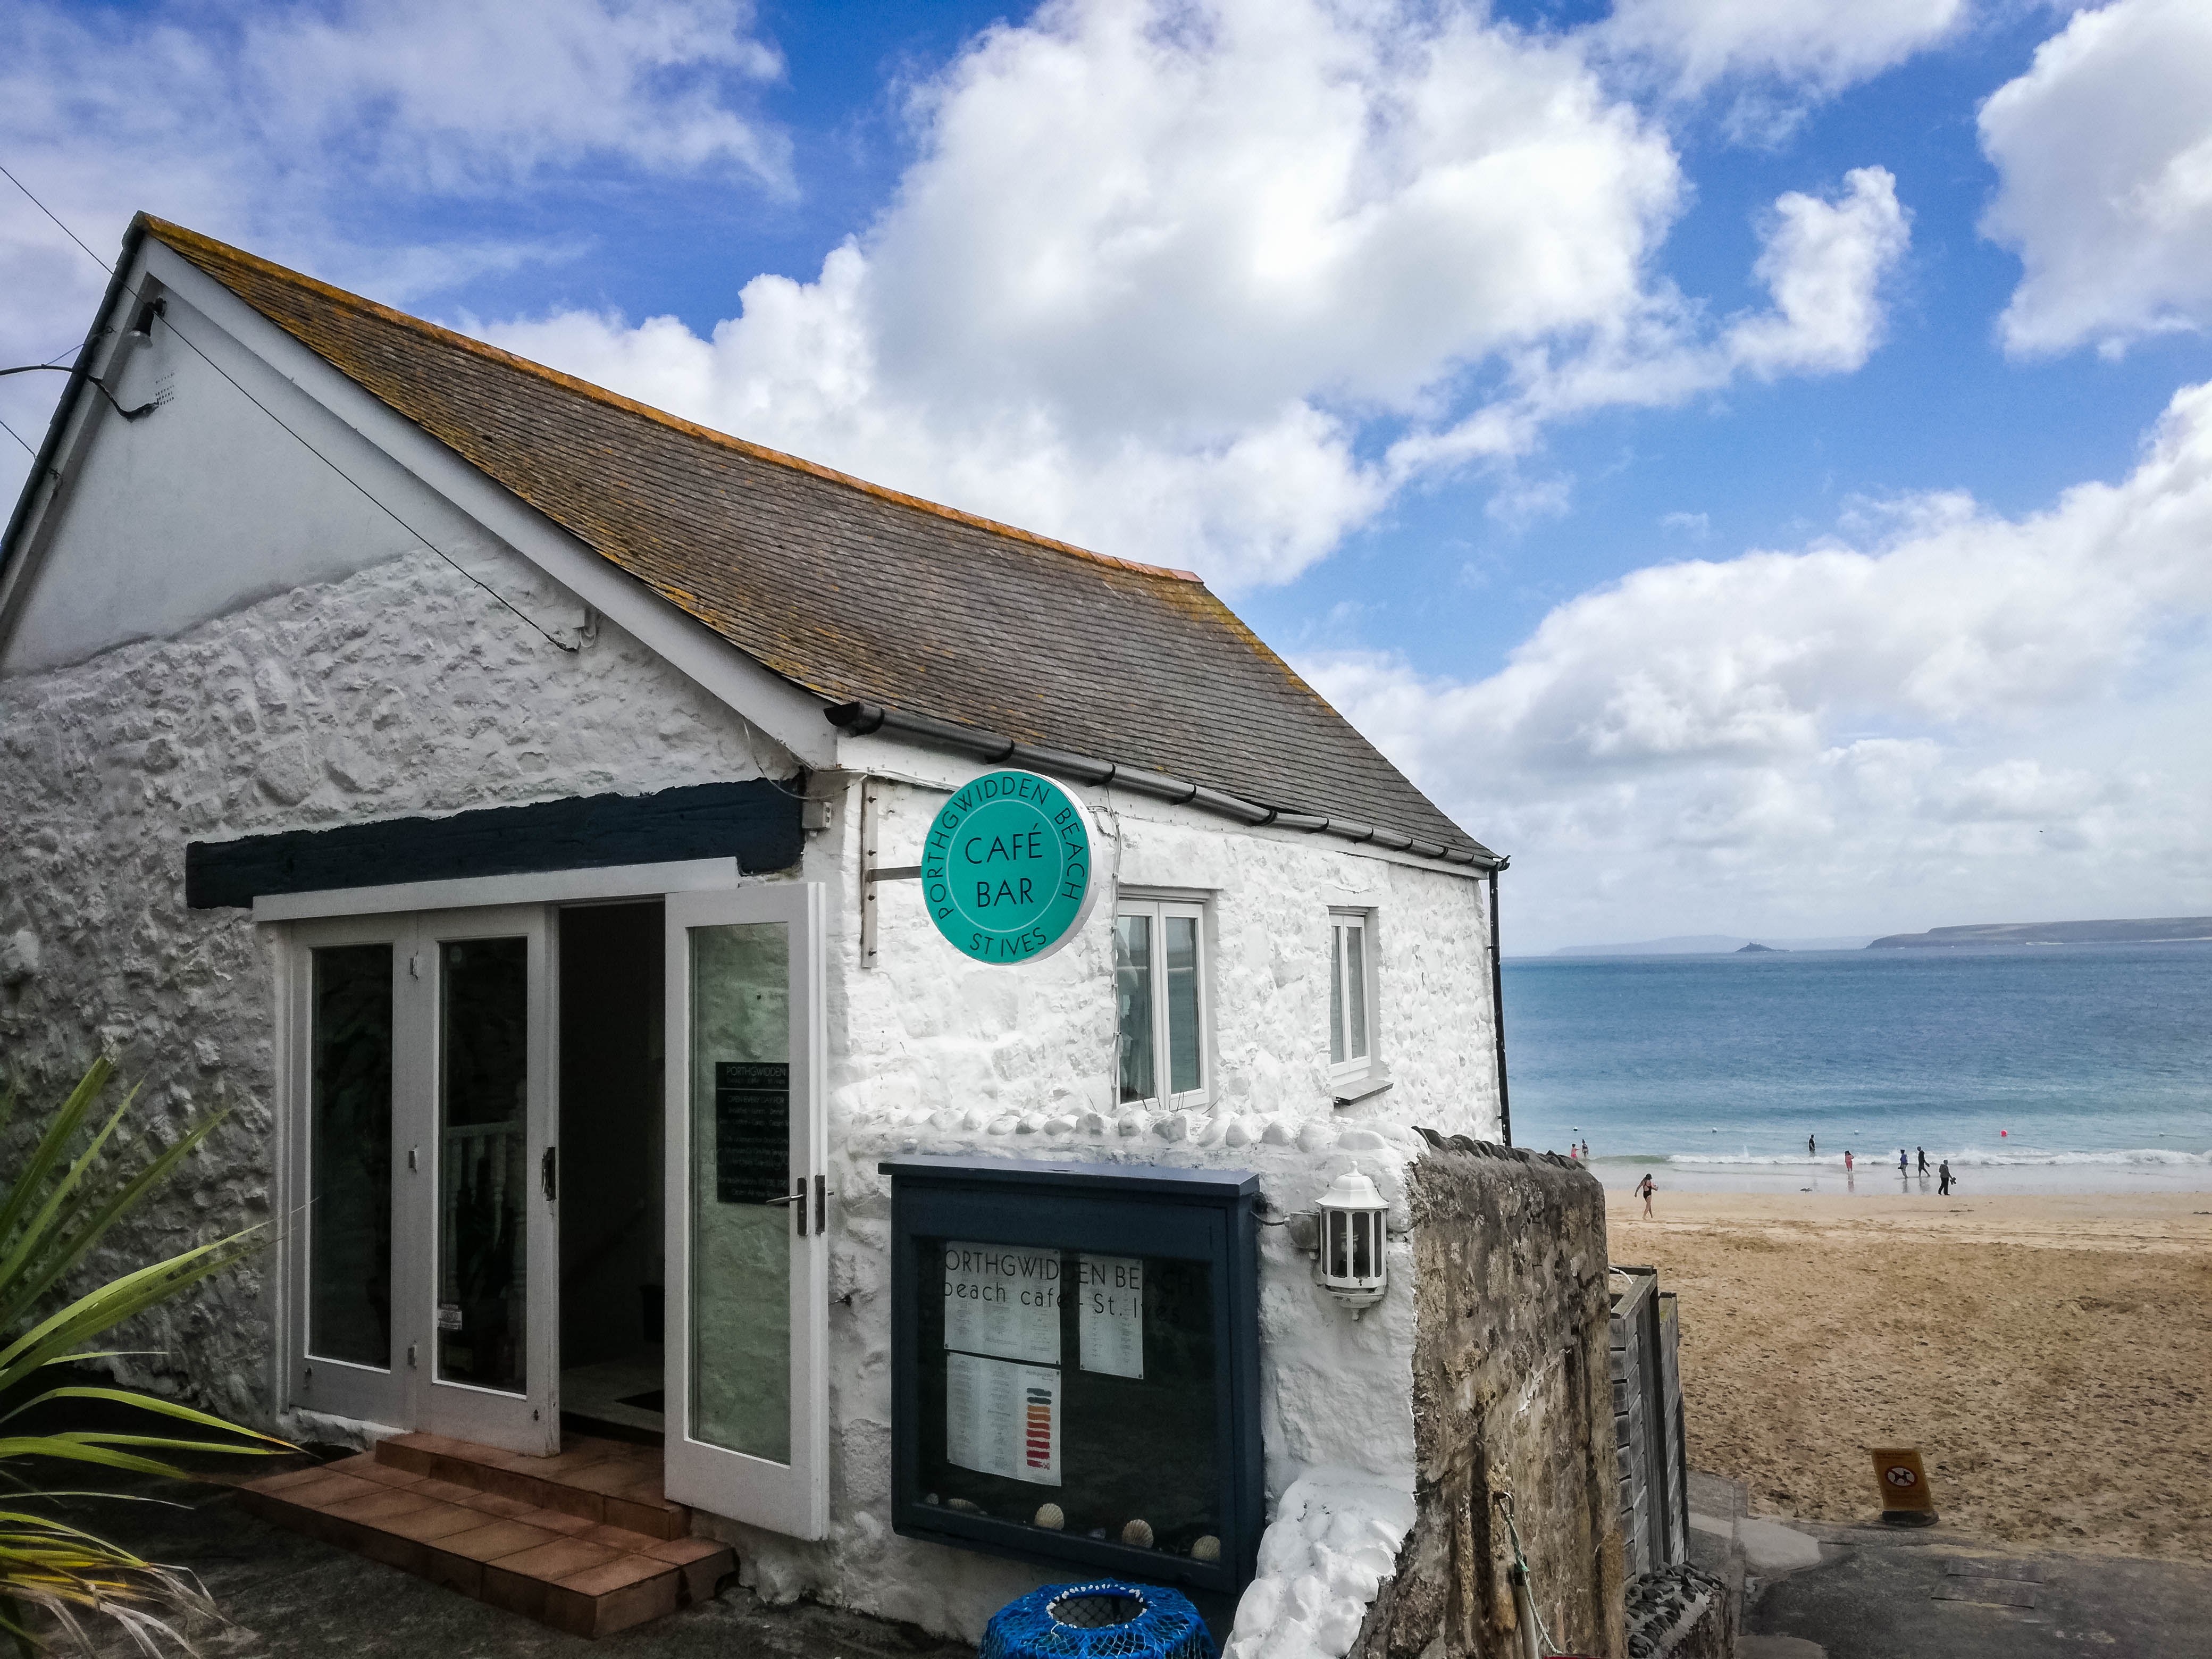 Cheap Eats in St Ives, Cornwall